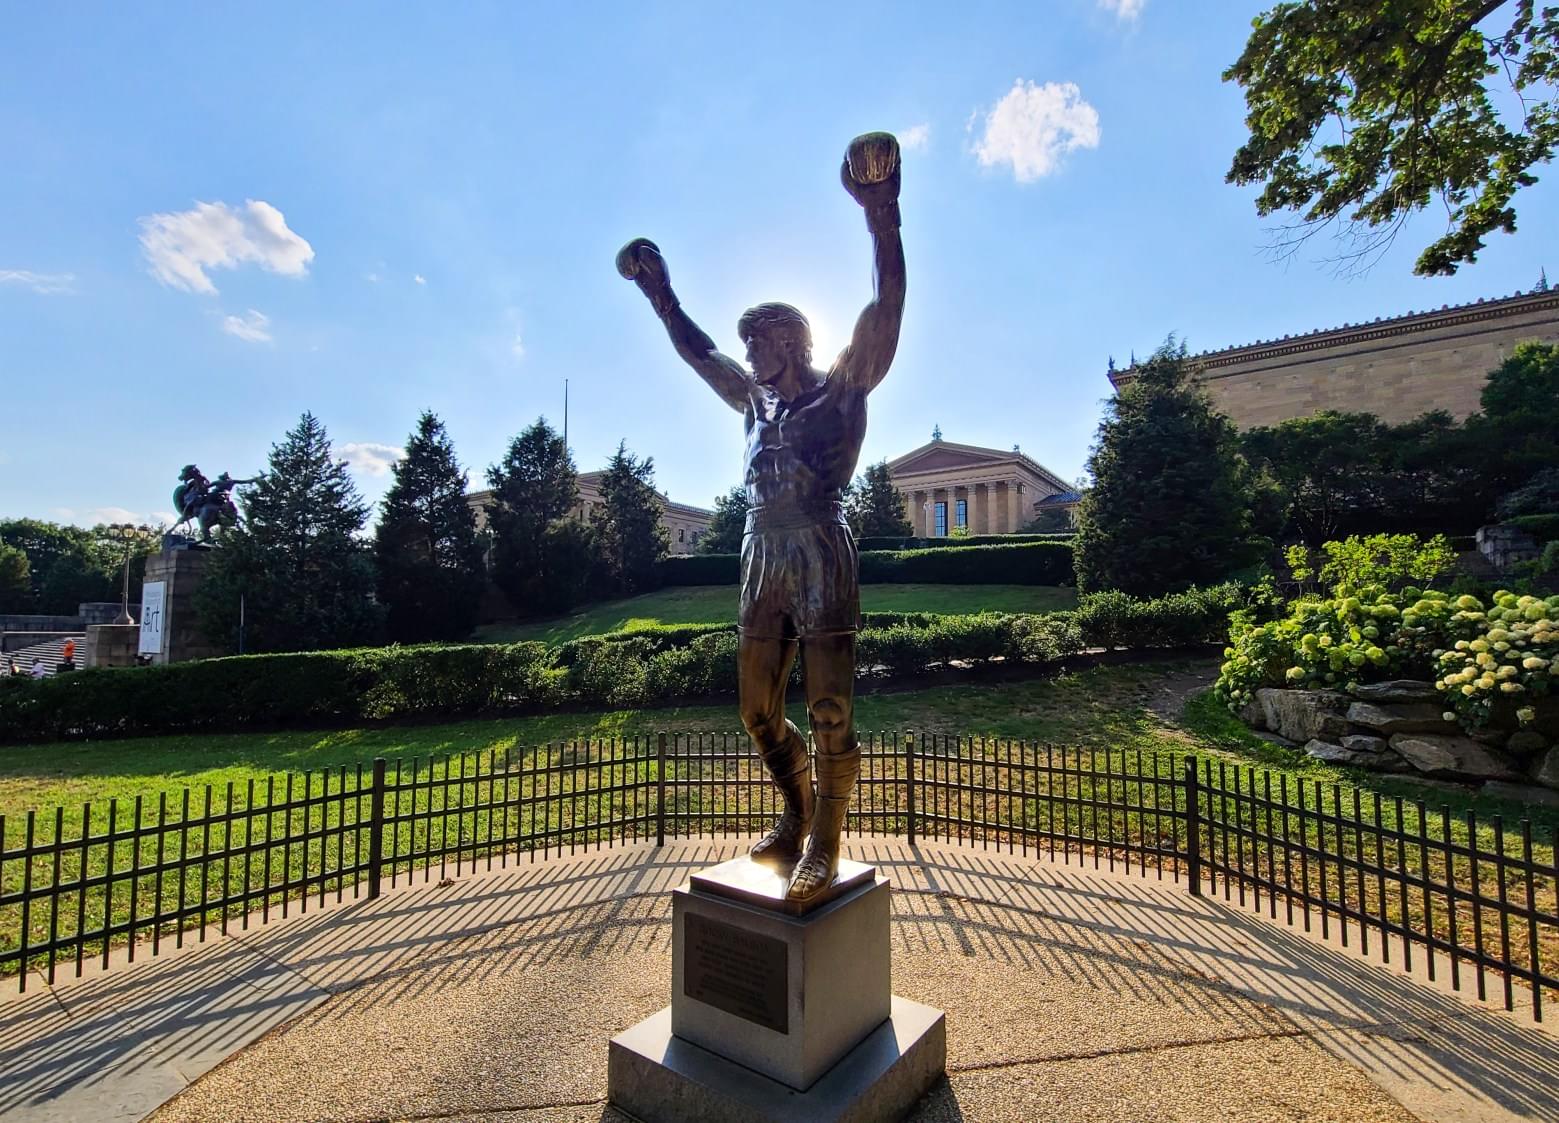 The Rocky Statue Overview